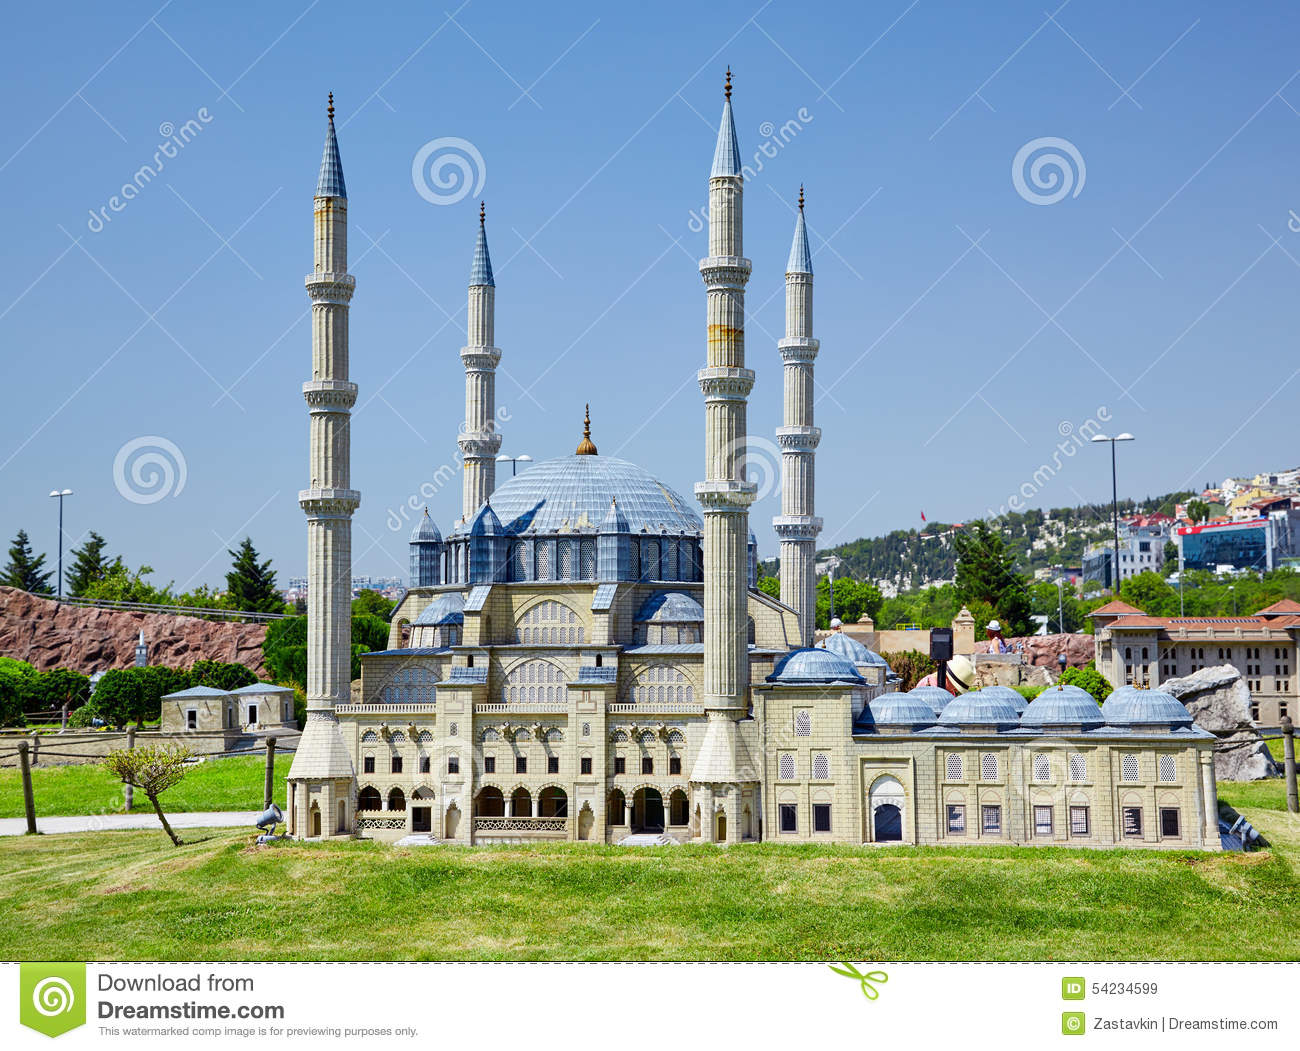 Miniaturk, Istanbul. The Domes Of Selimiye Mosque In Edirne, Tur.